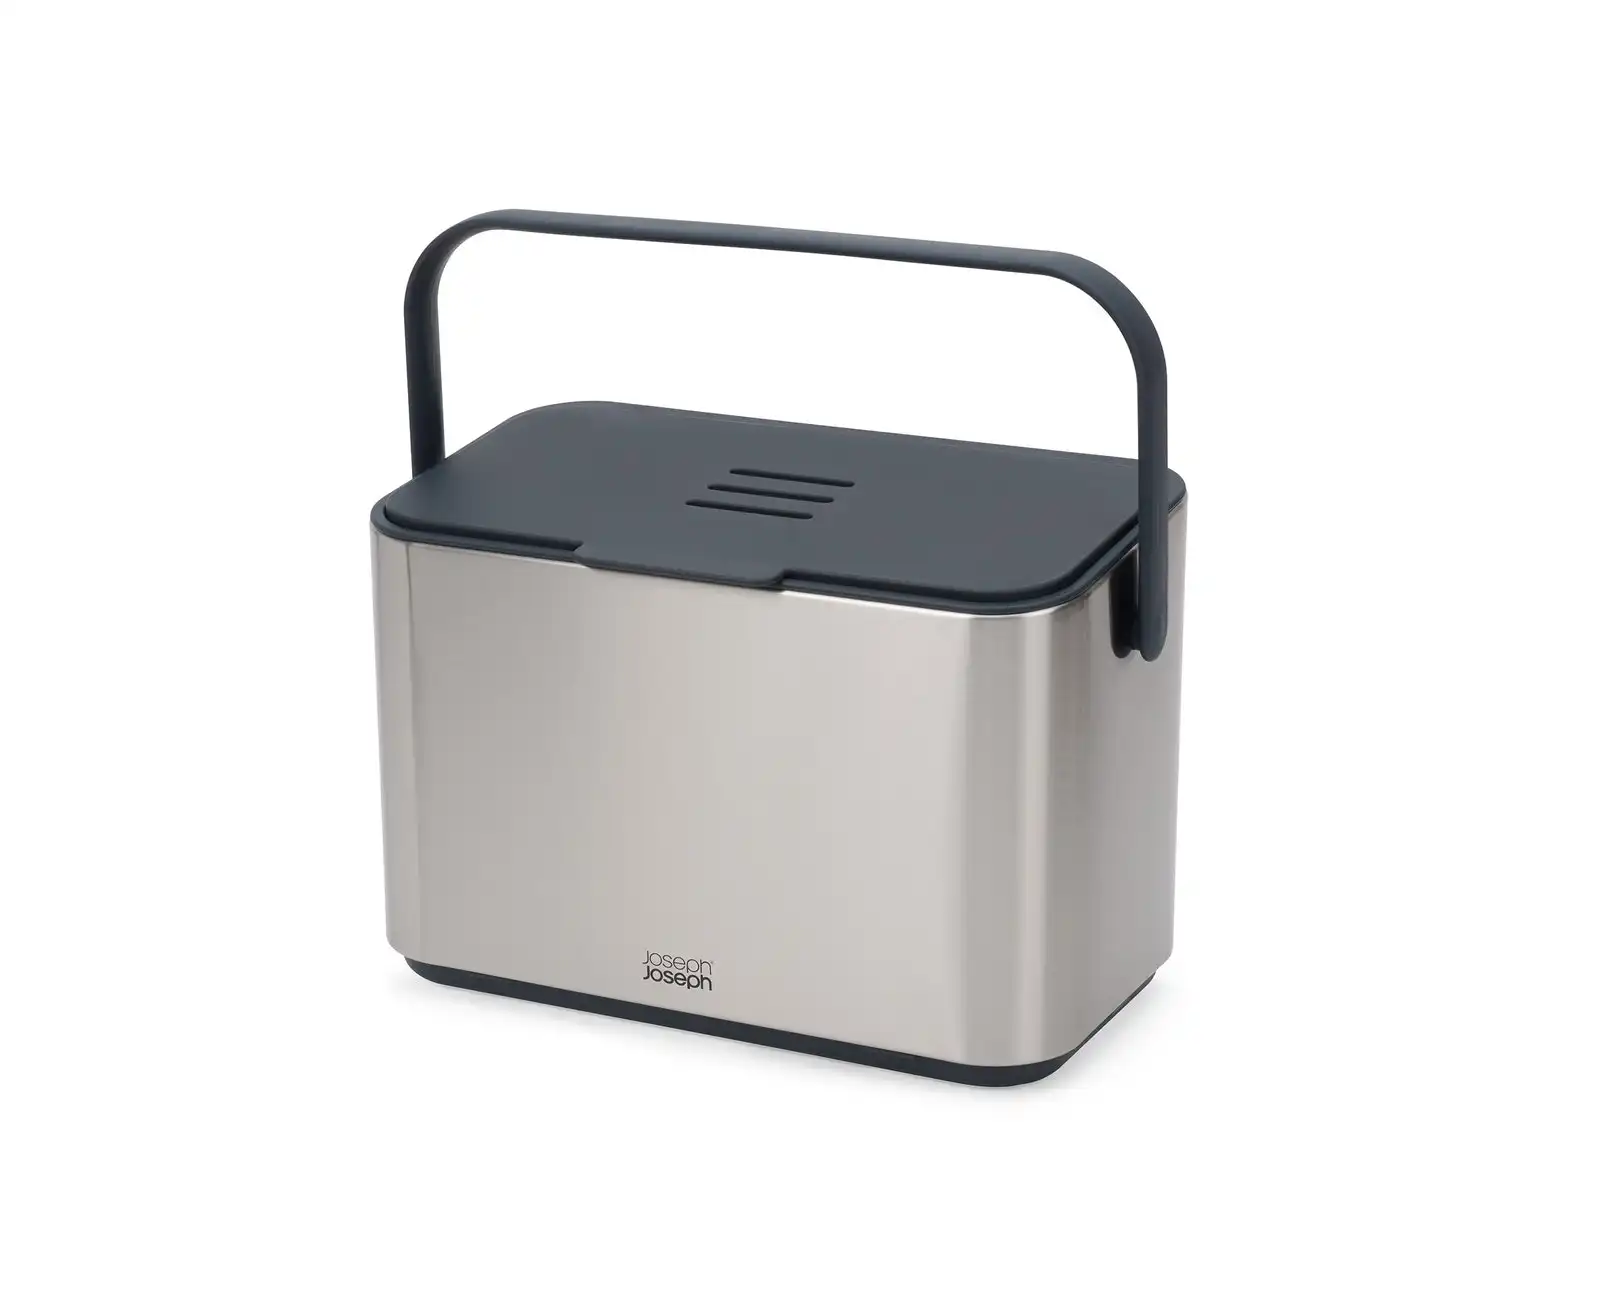 Joseph Joseph Collect 4 Litre Stainless Steel Food Waste Caddy